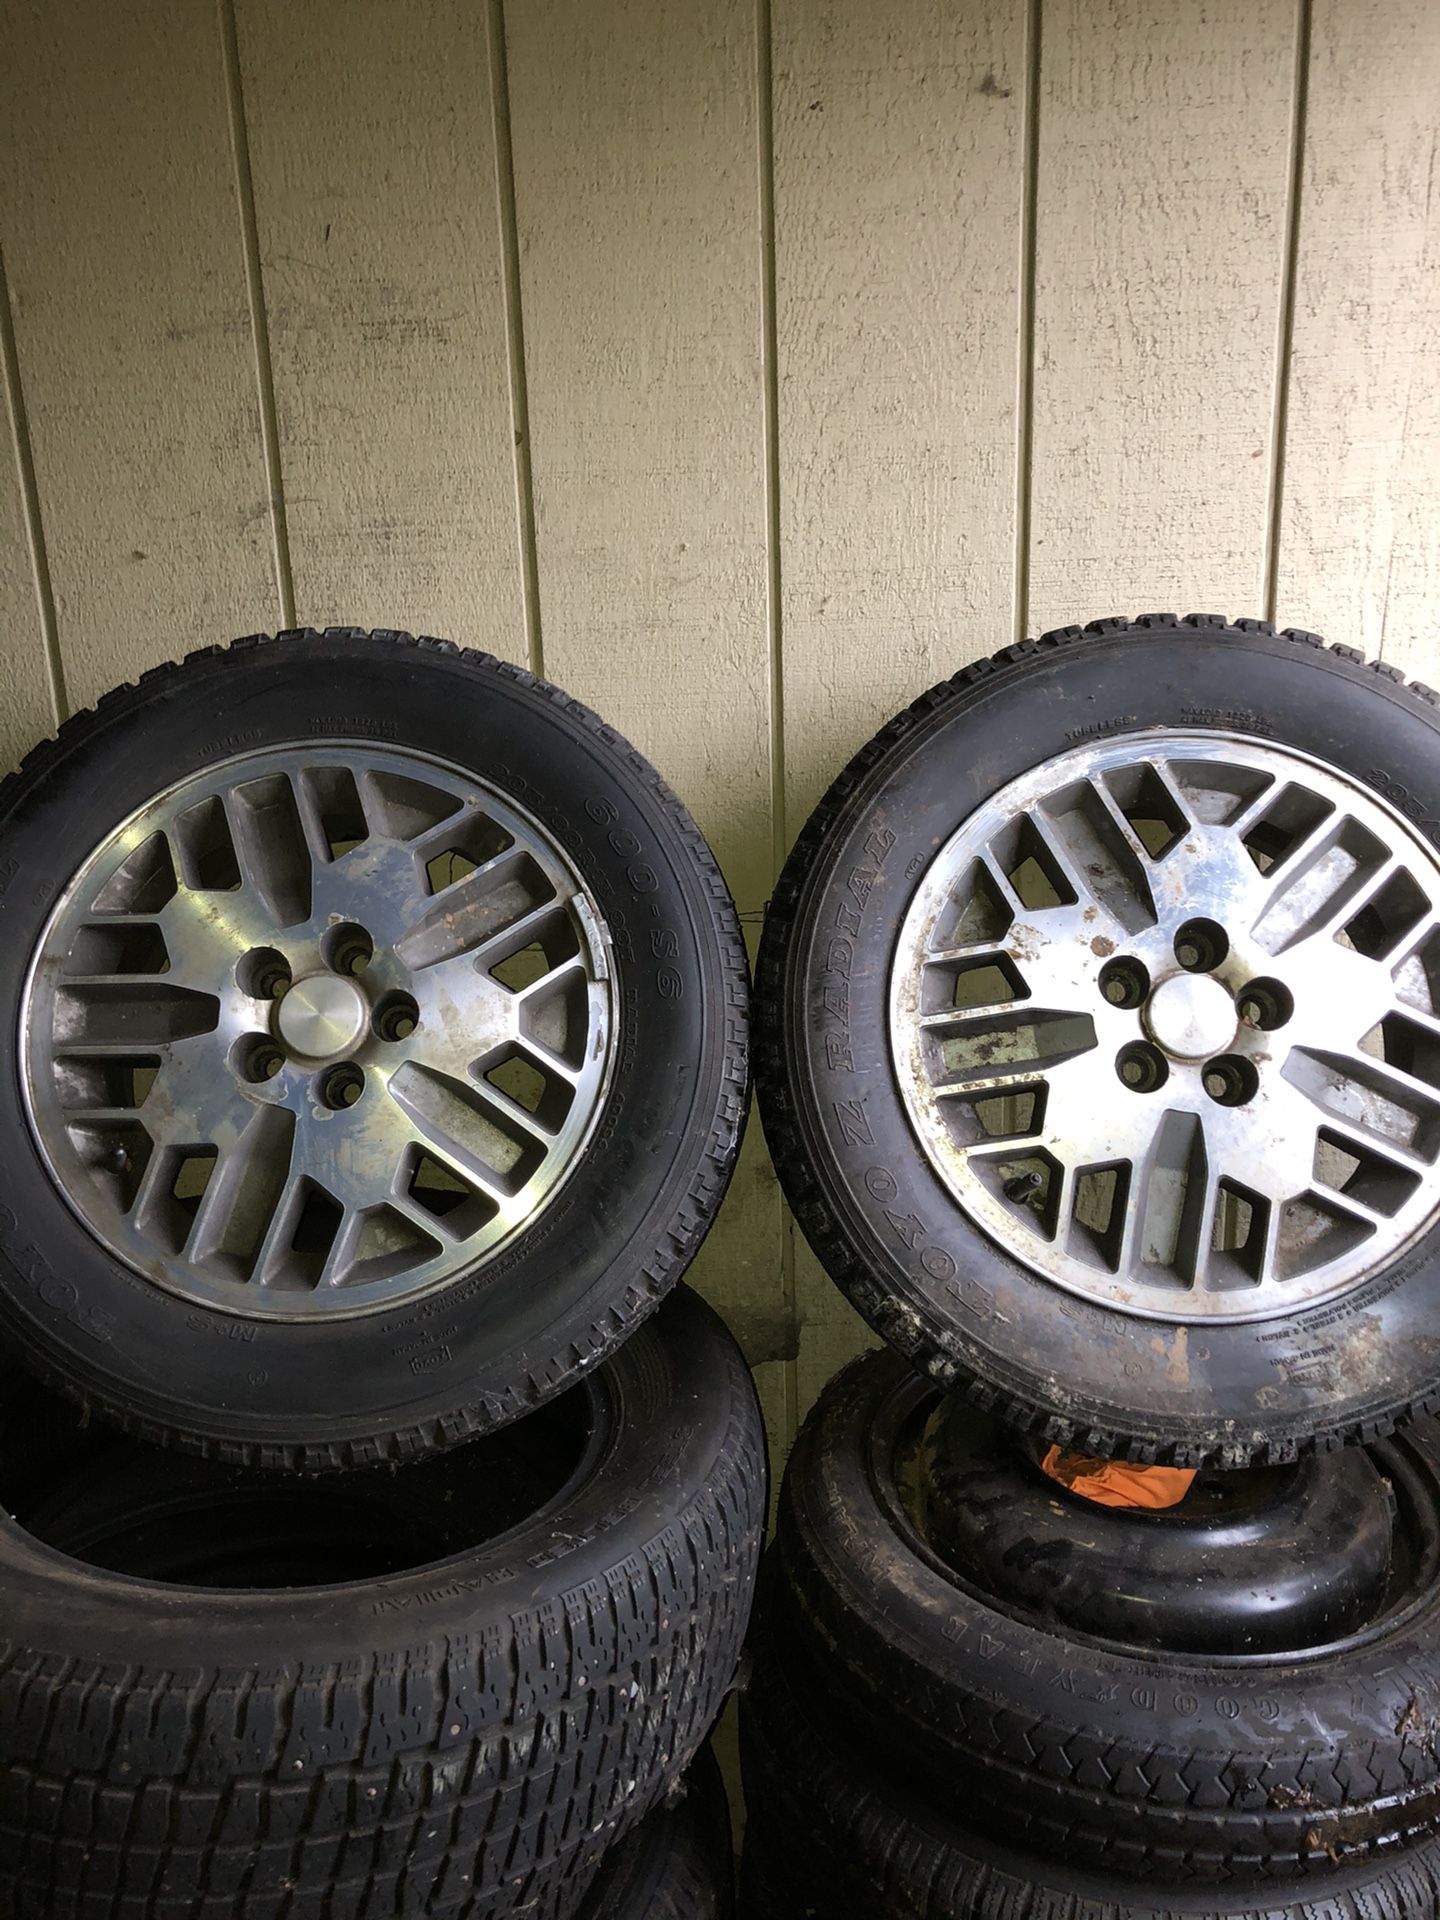 Toyos M/S 205/60R15 never used just dirty can be cleaned 200 with rims OBO have all four